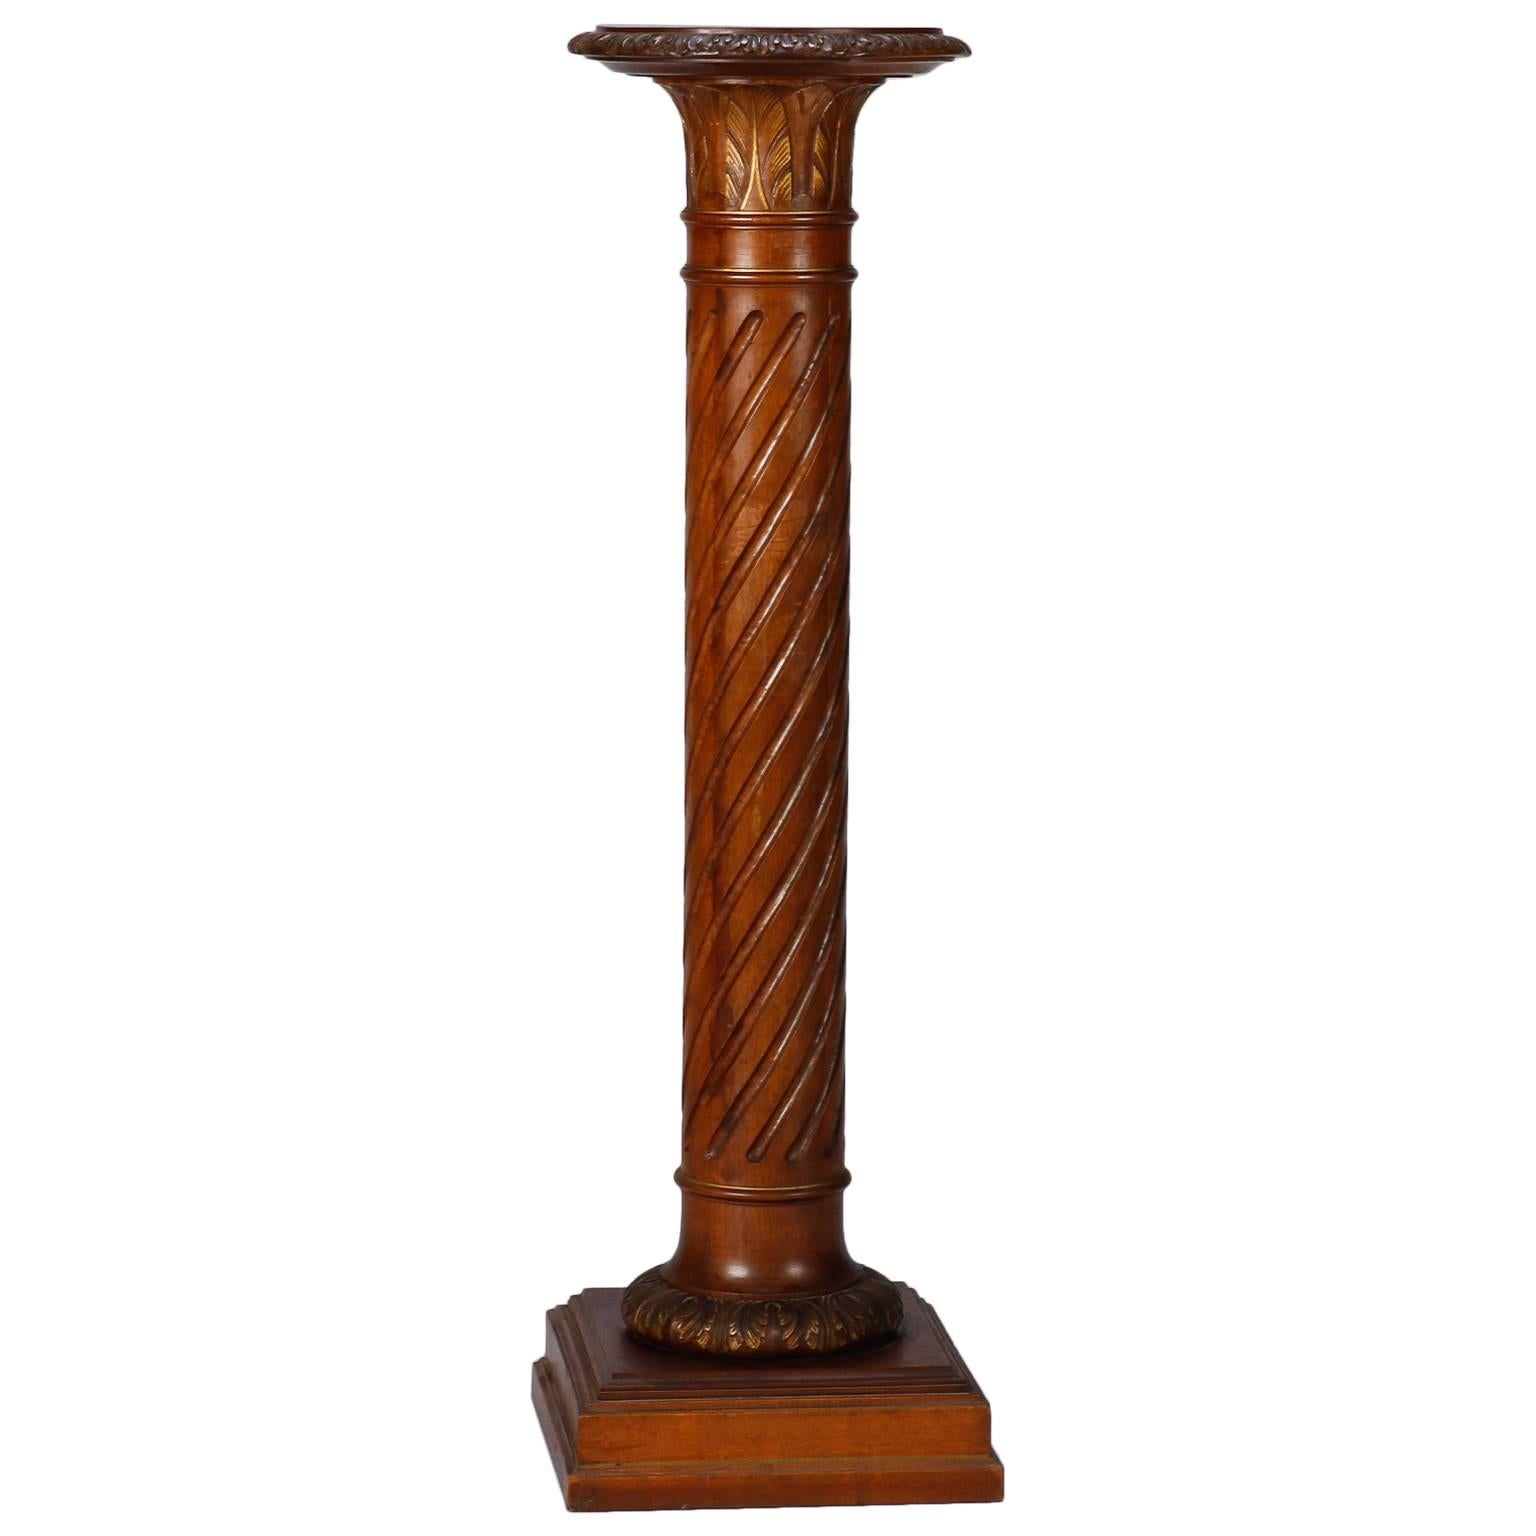 Tall Carved Wood Pedestal Plant or Statue Stand